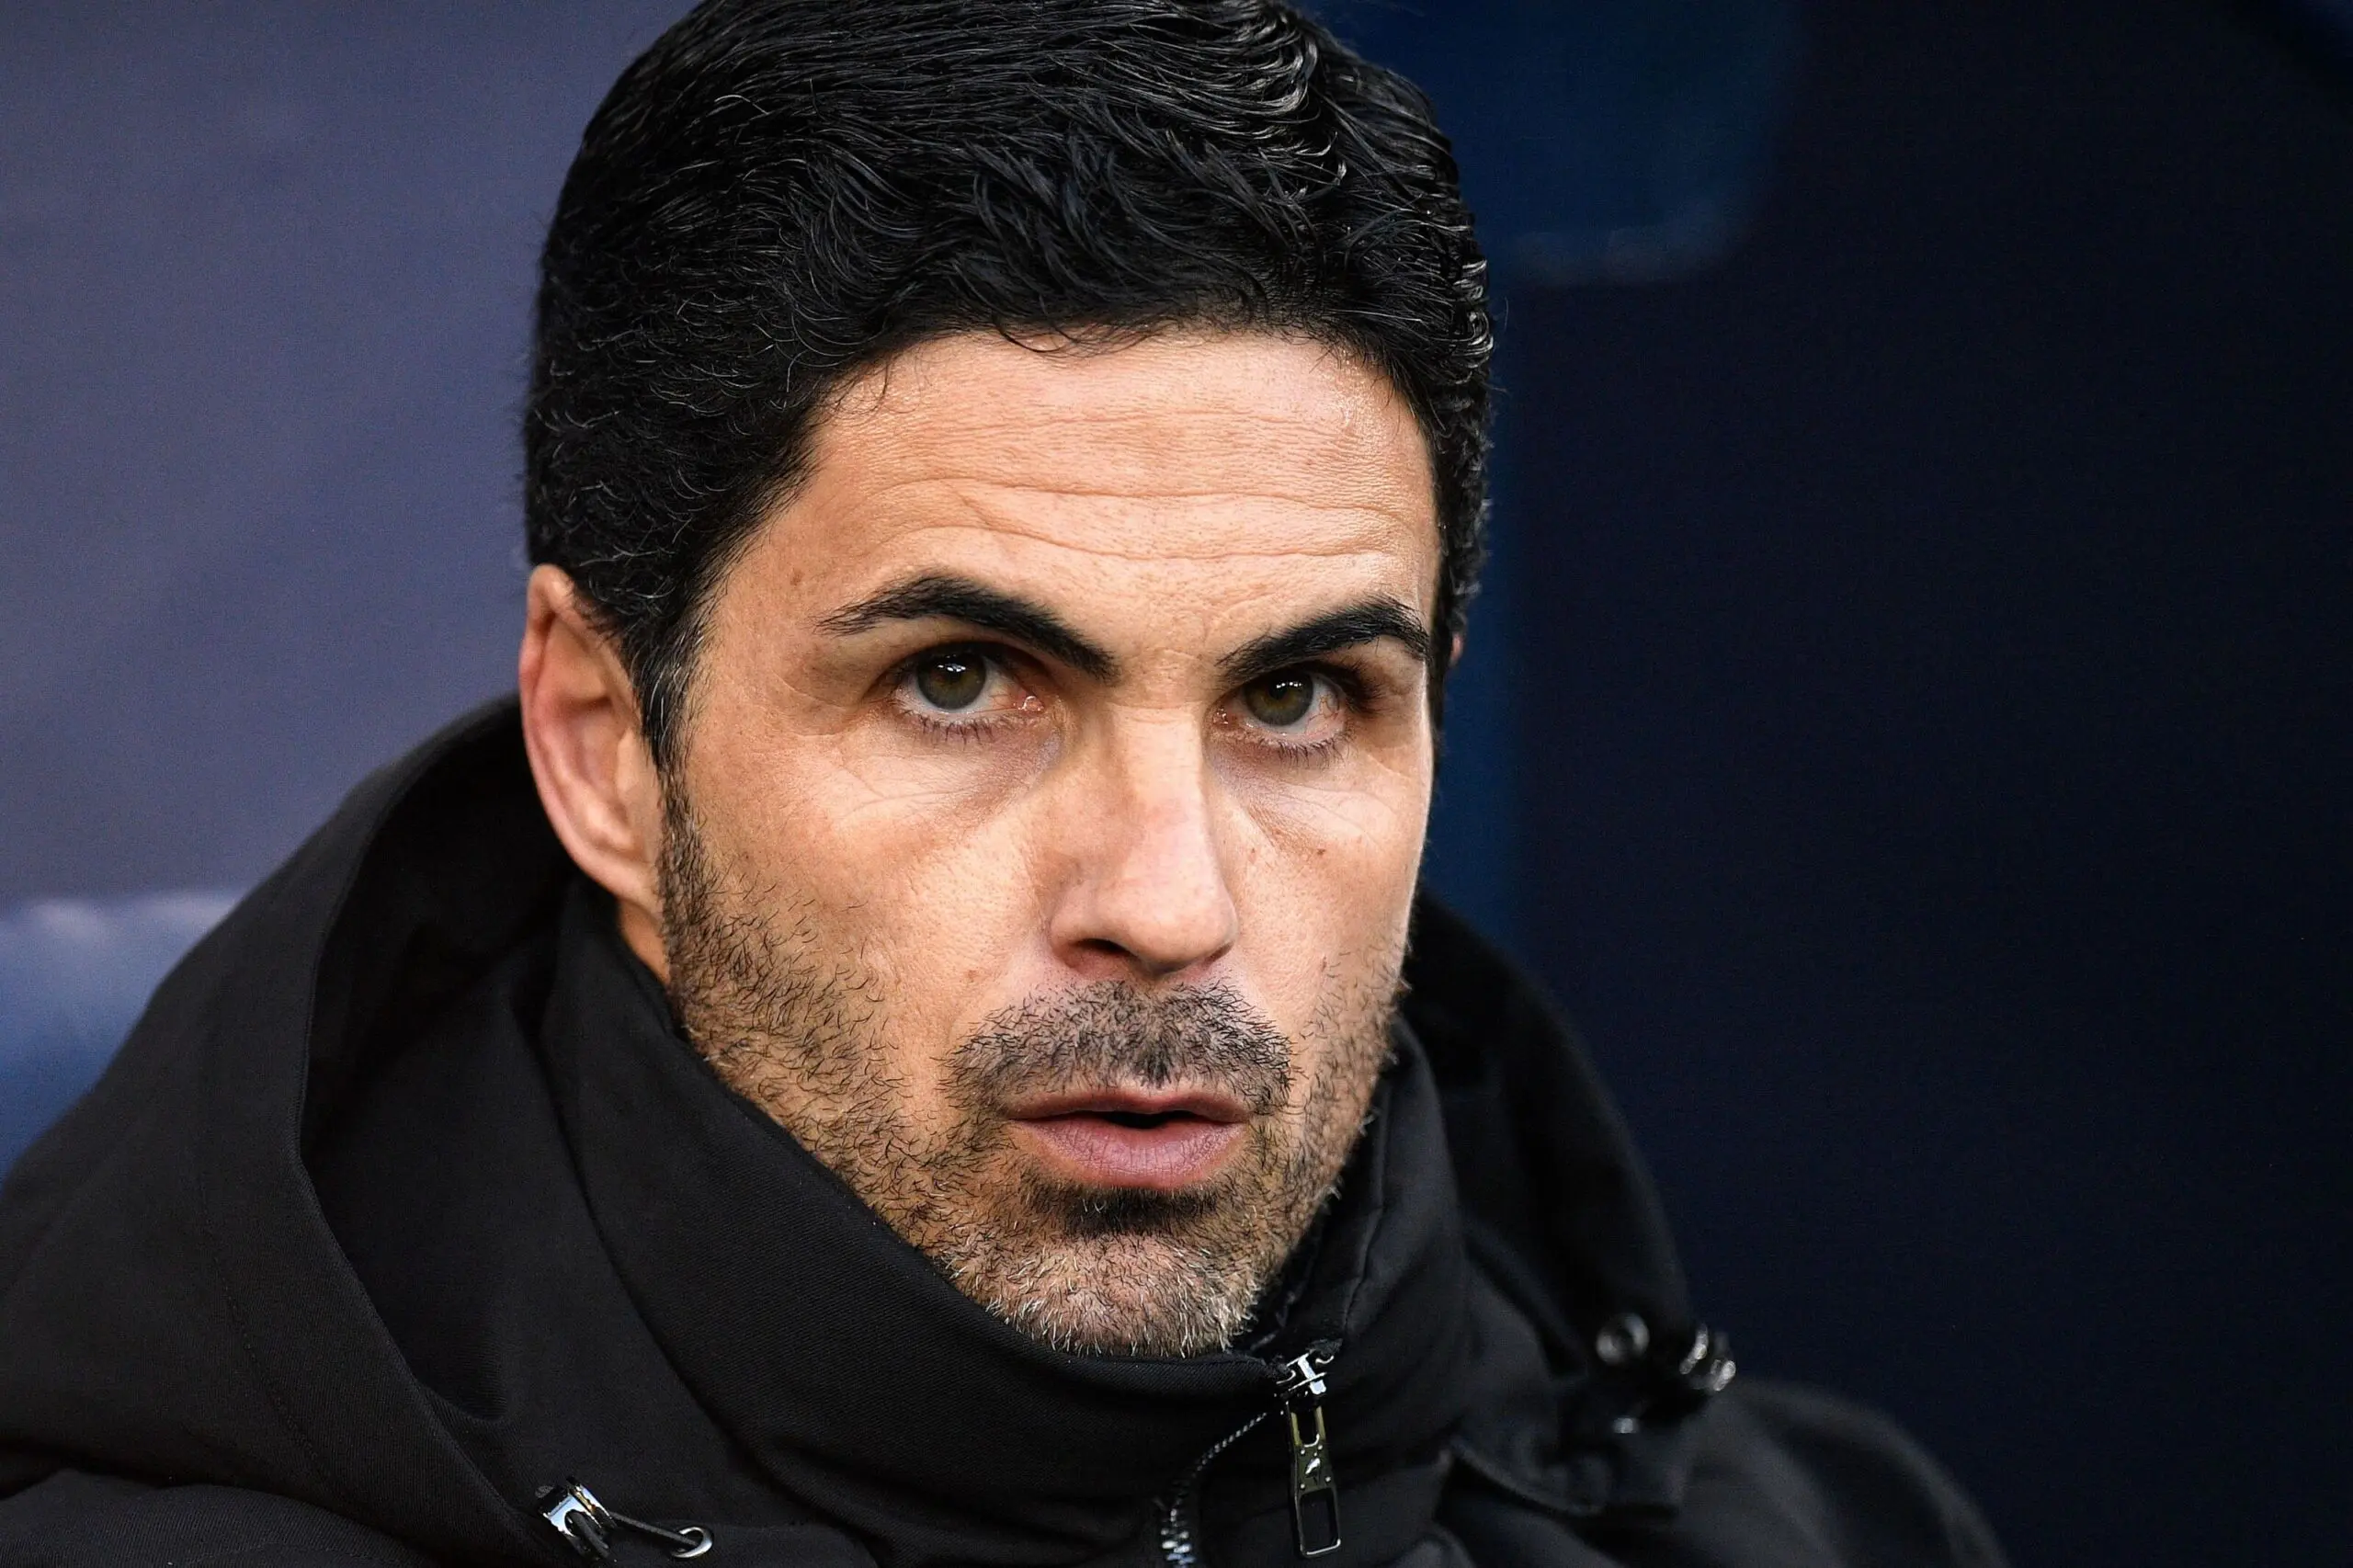 EPL: Arsenal boss, Arteta names one important player ahead of Old Trafford clash